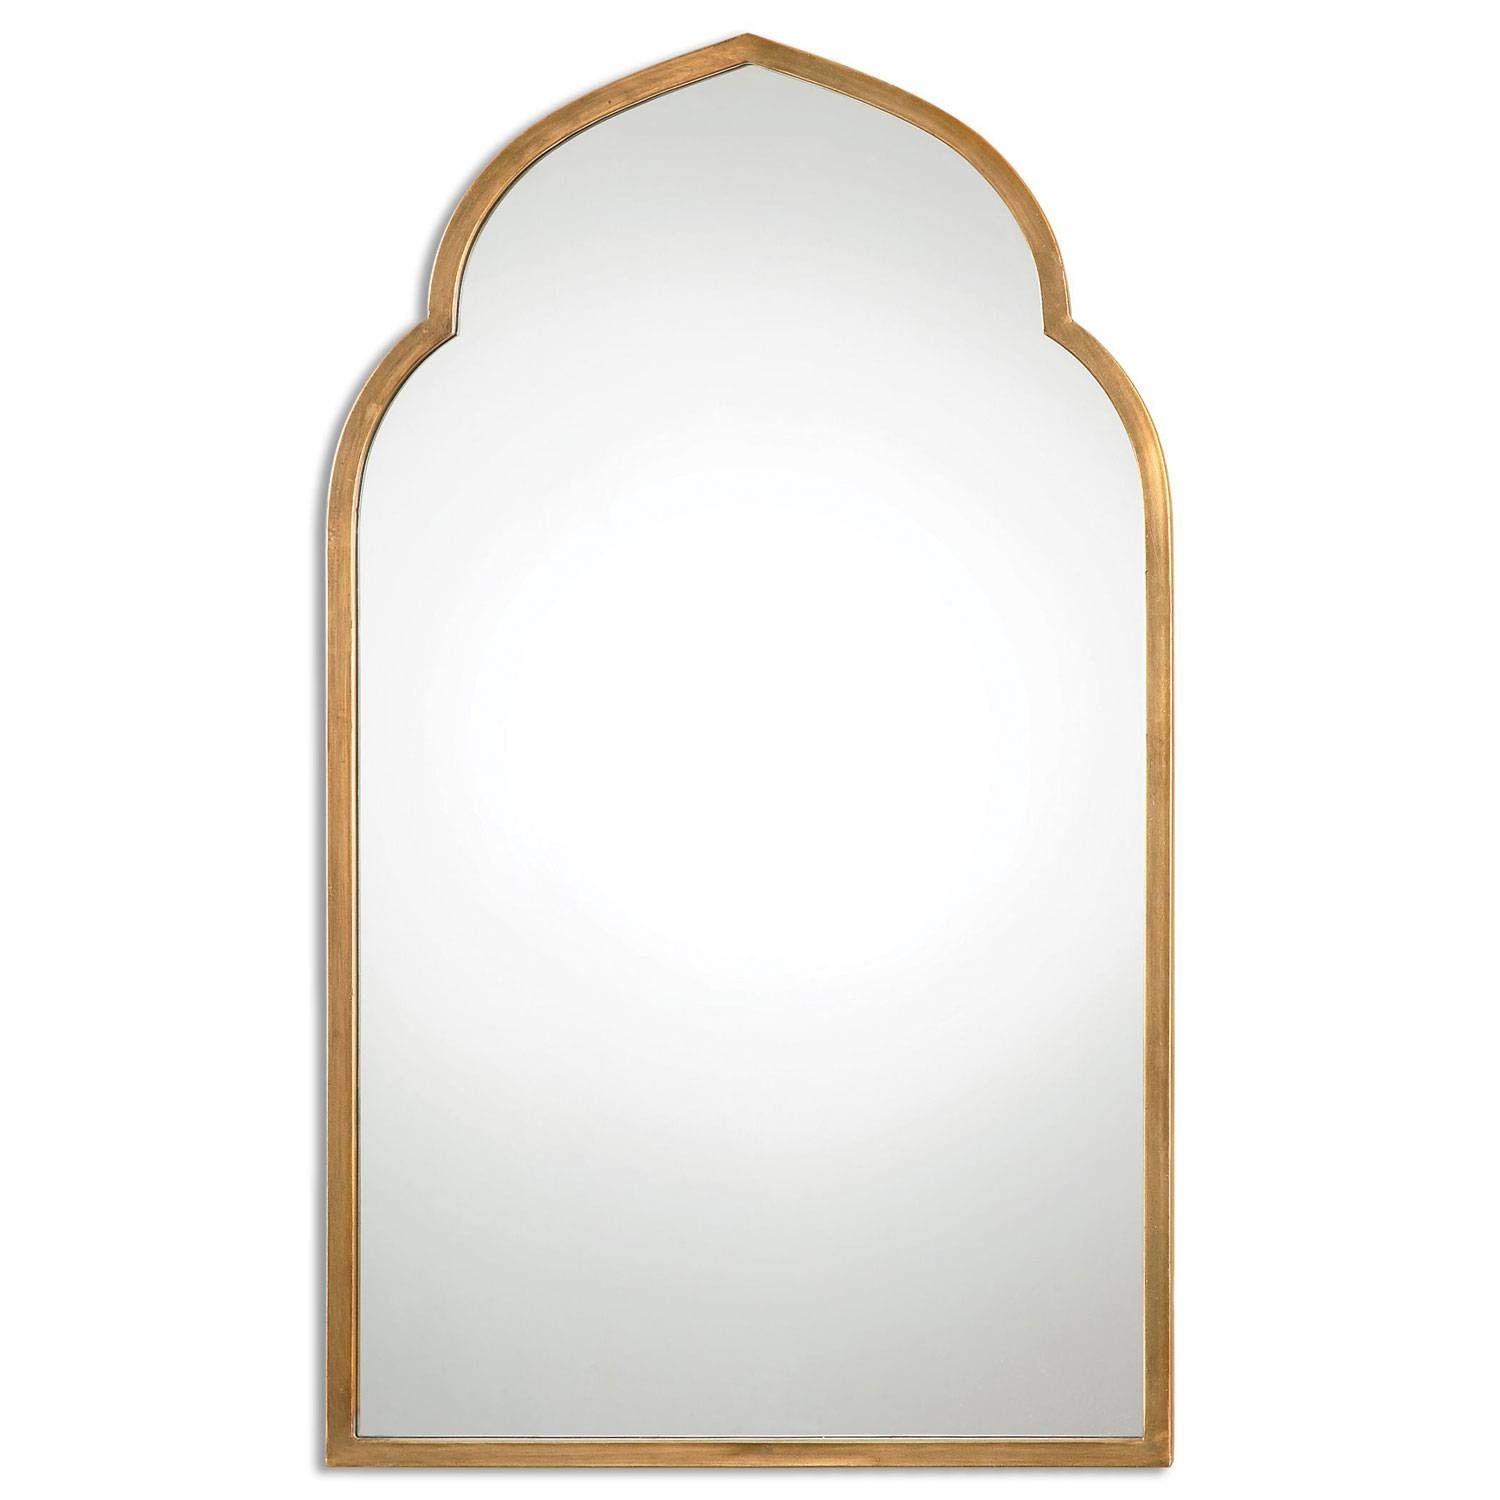 Kenitra Gold Arch Mirror Uttermost Wall Mirror Mirrors Home Decor Pertaining To Shopping Mirrors (View 3 of 15)